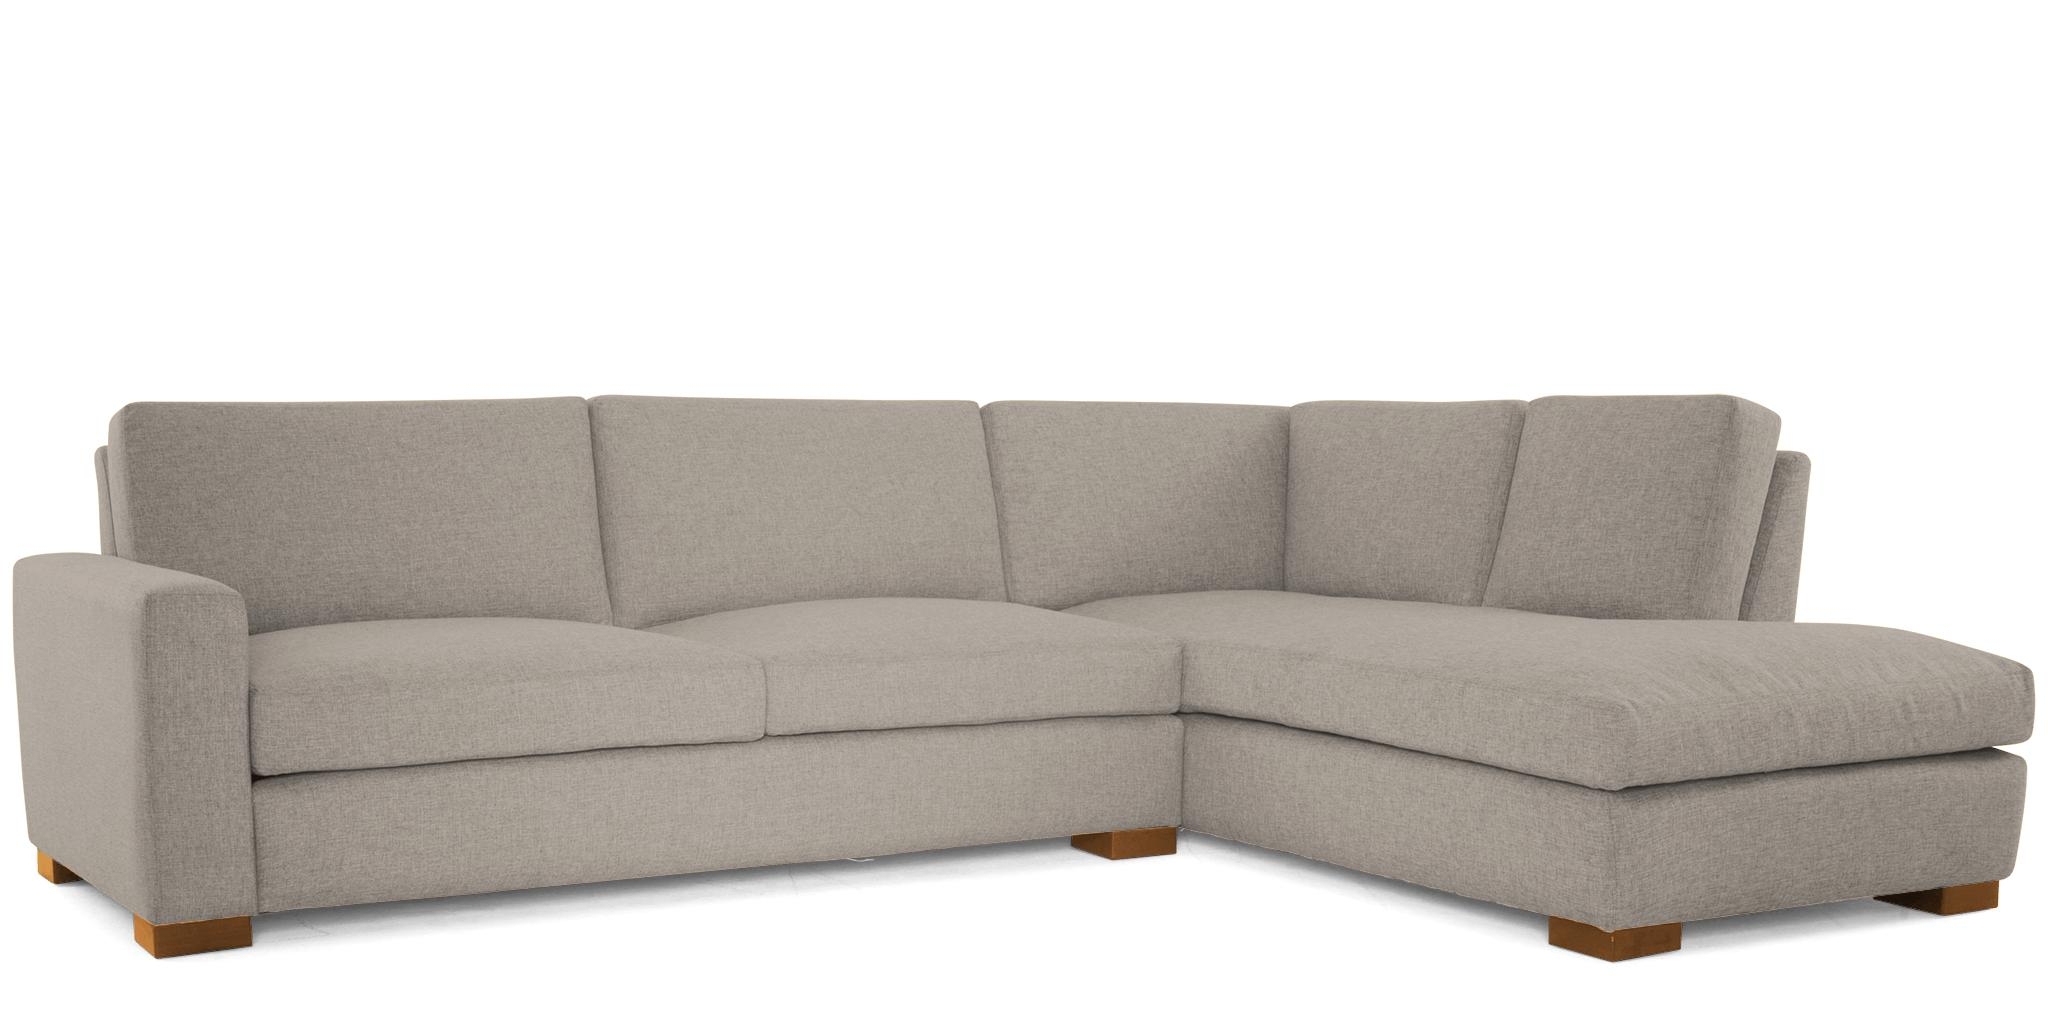 Gray Anton Mid Century Modern Sectional with Bumper - Prime Stone - Mocha - Right  - Image 1